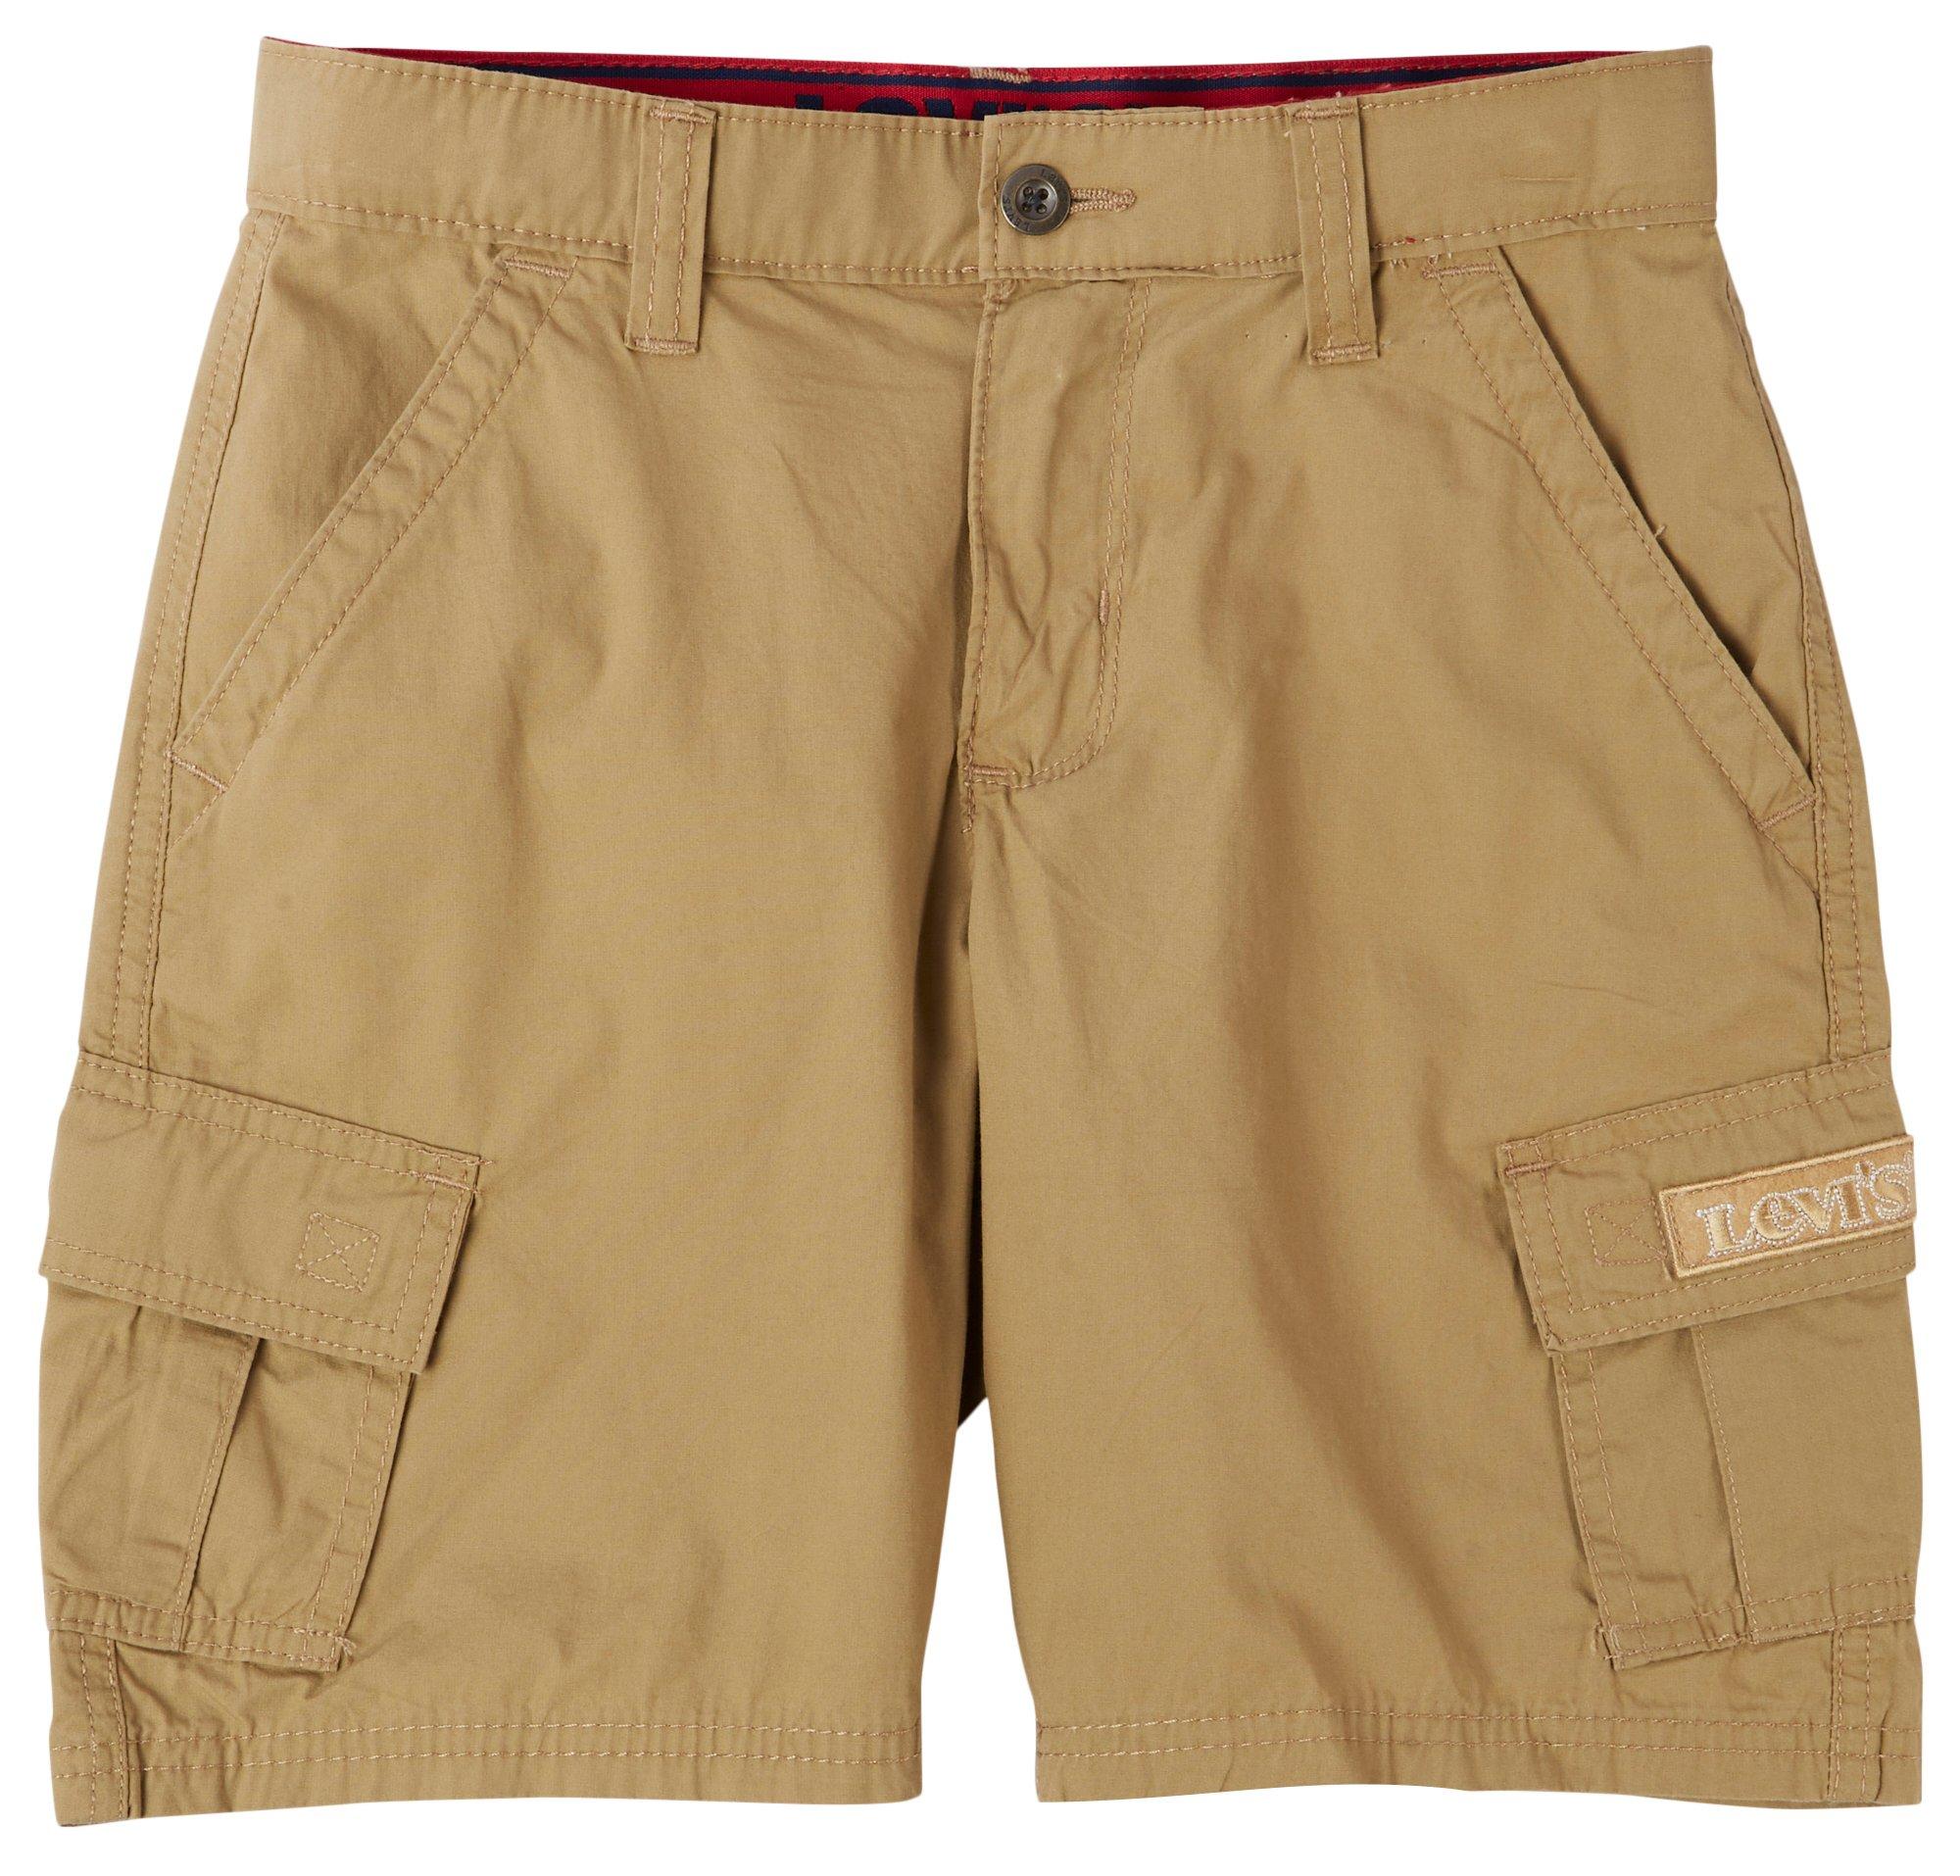 Big Boys Relaxed Fit XX Cargo Shorts